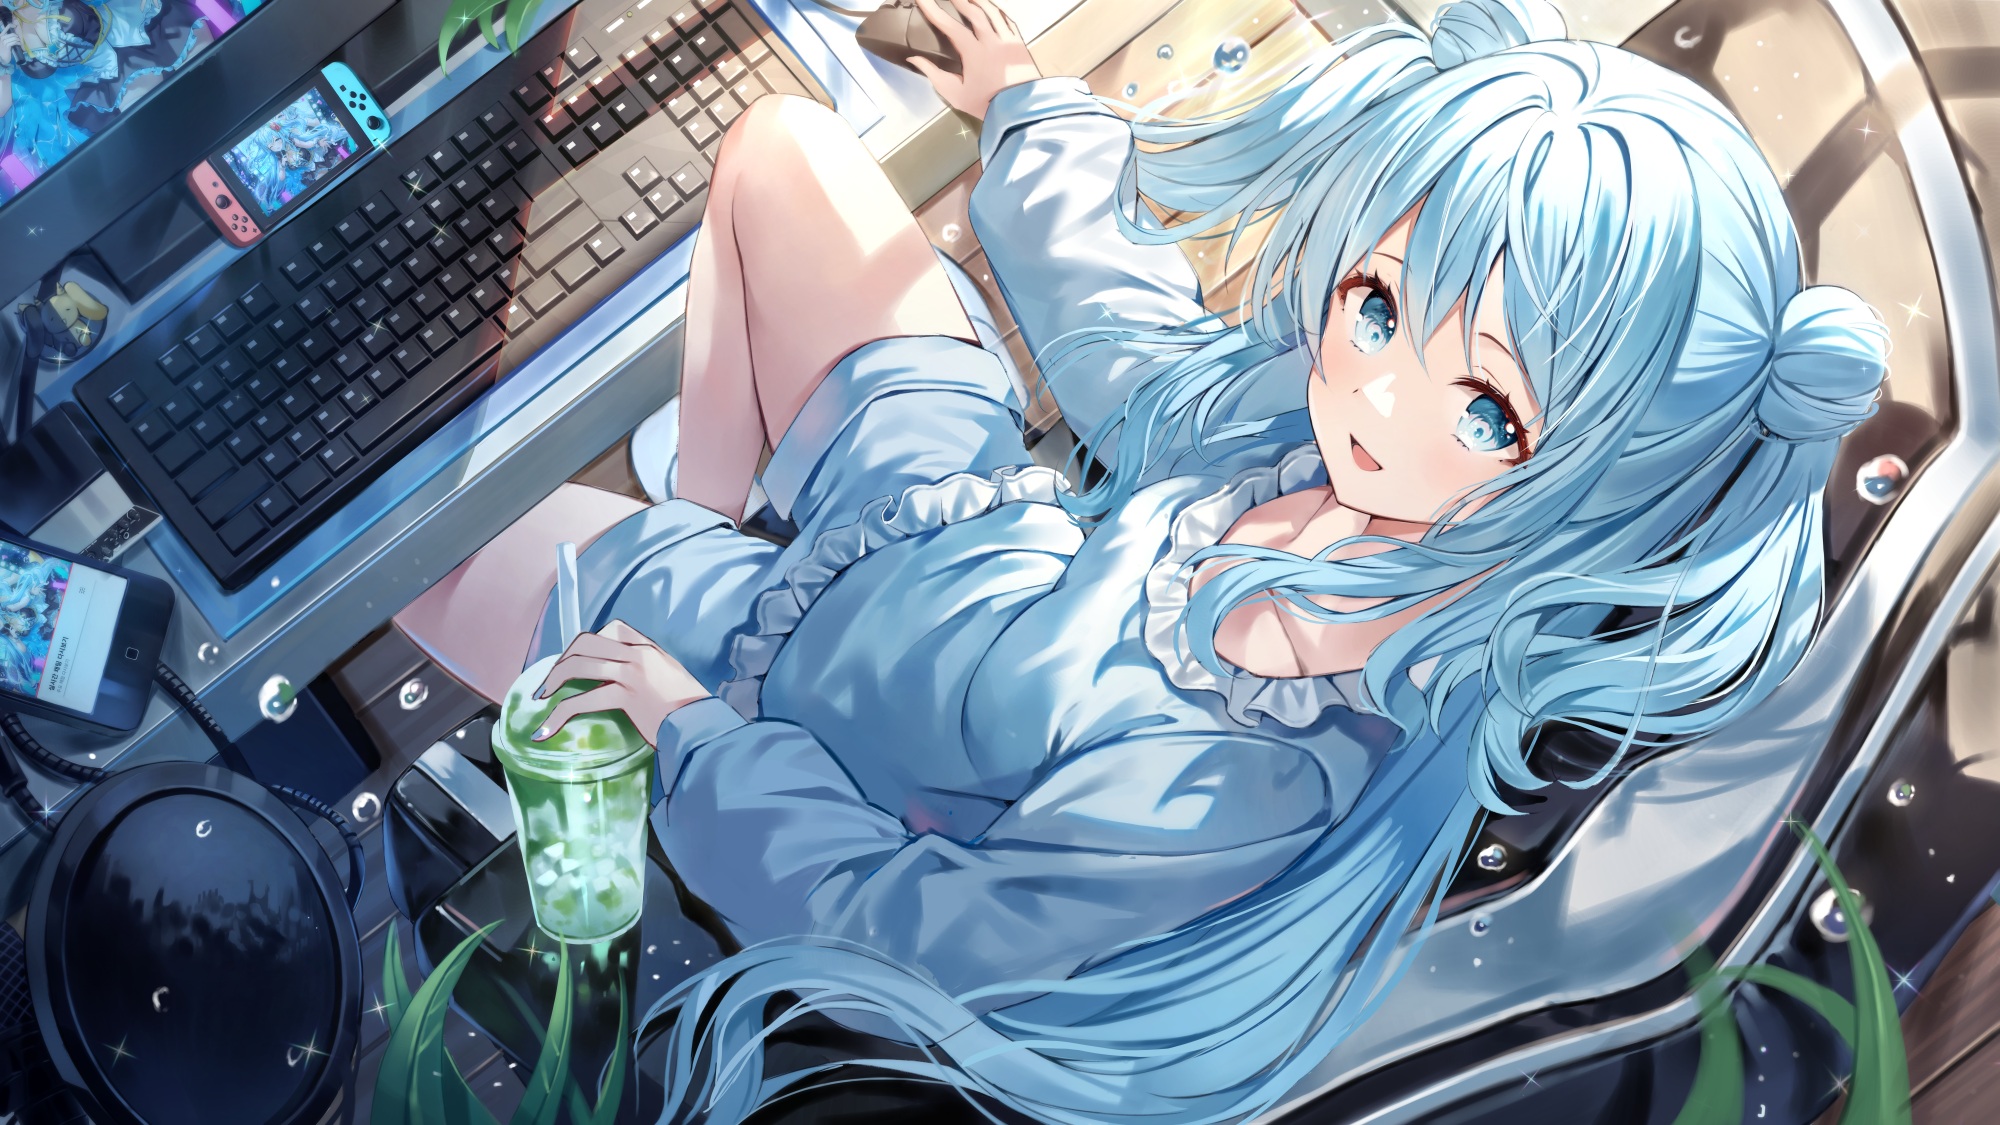 Anime 2000x1125 anime anime girls blue hair blue eyes drink Nintendo Switch phone twintails water drops keyboards looking up solo